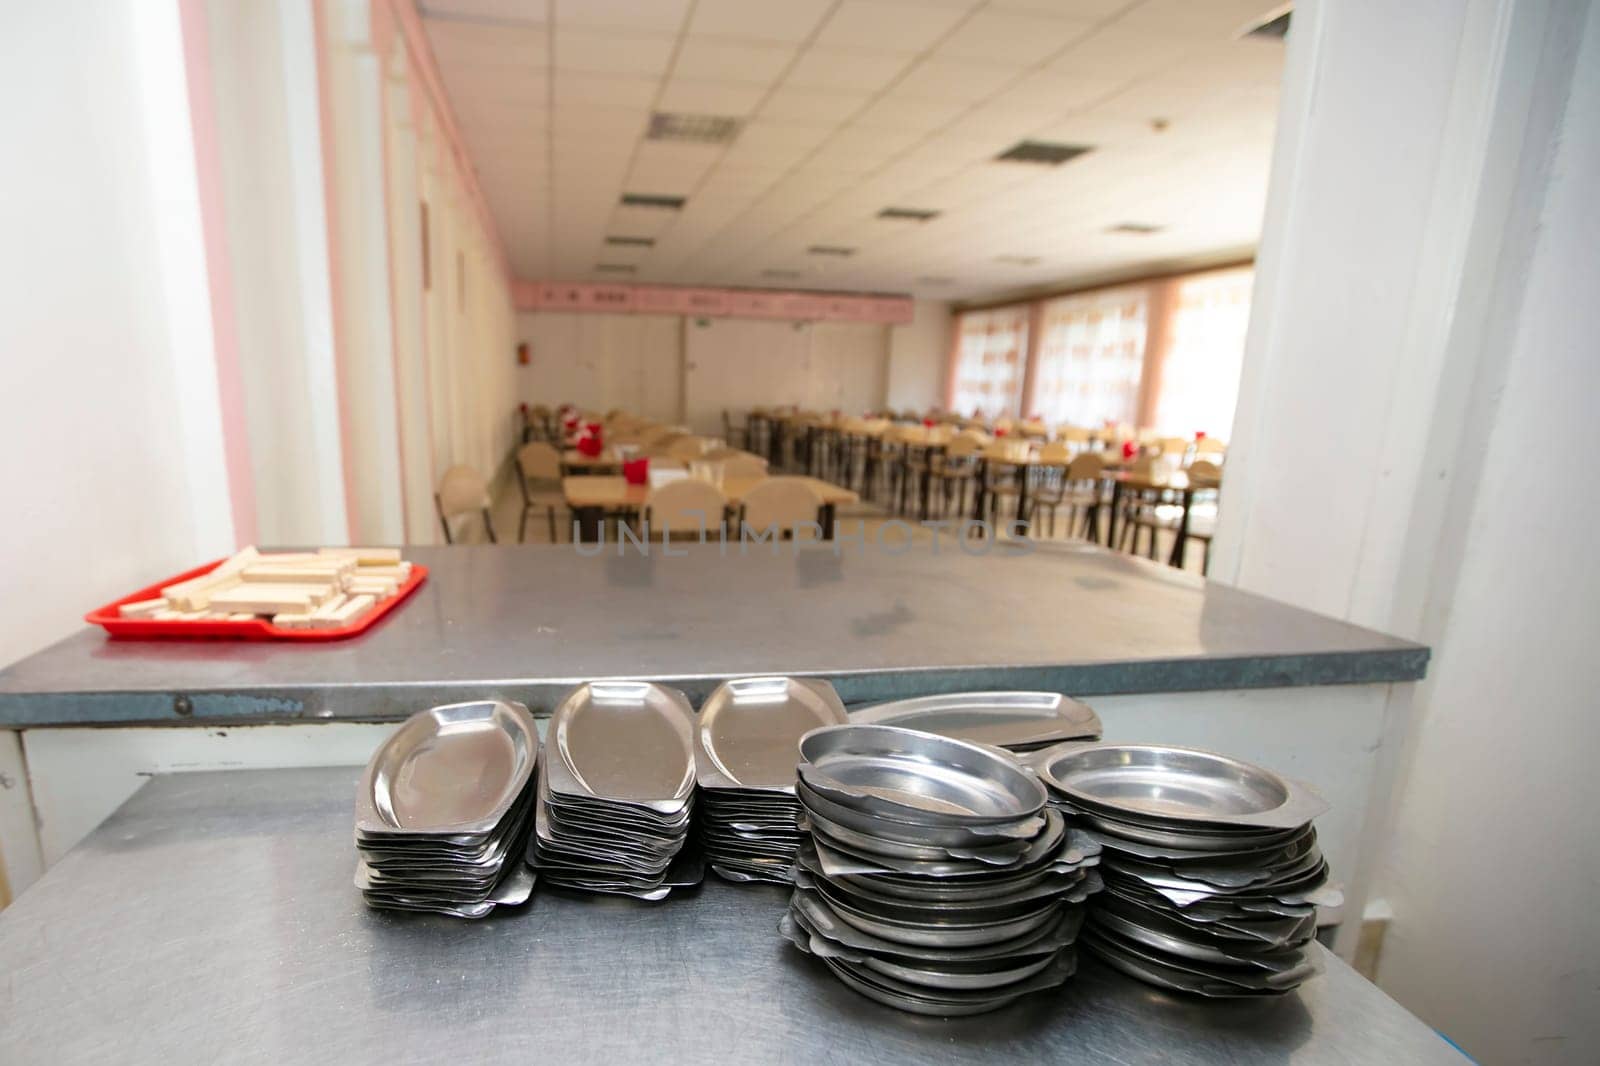 Iron plates in the background of a public dining room.School breakfast in a Russian school